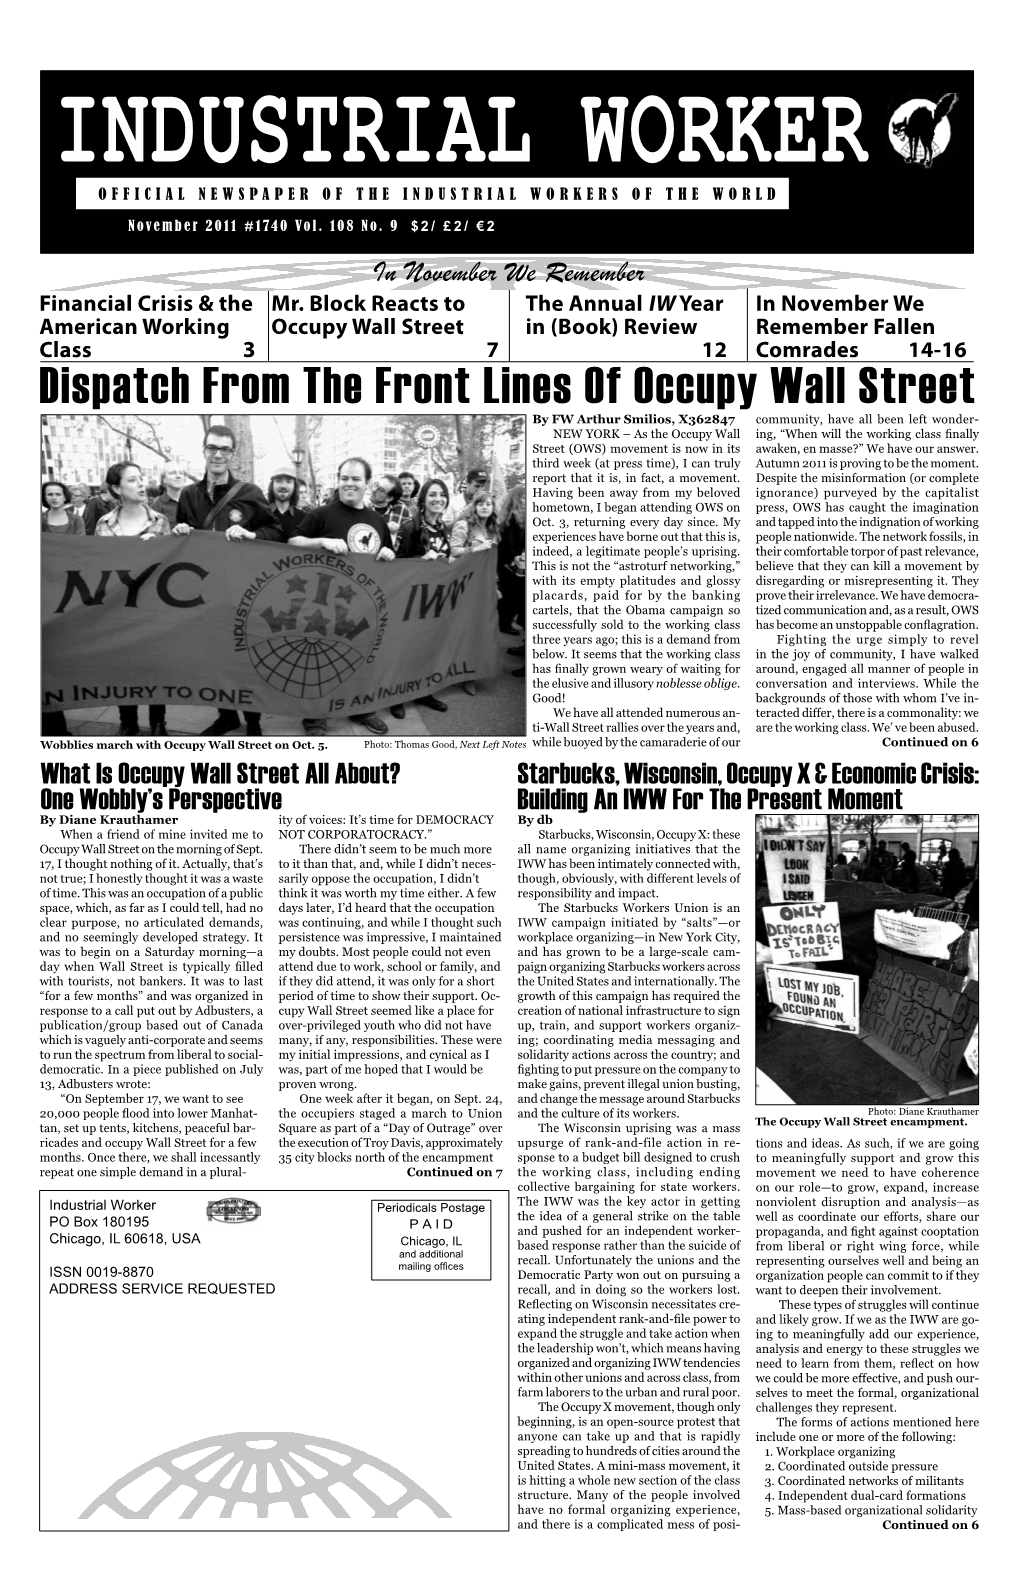 Dispatch from the Front Lines of Occupy Wall Street